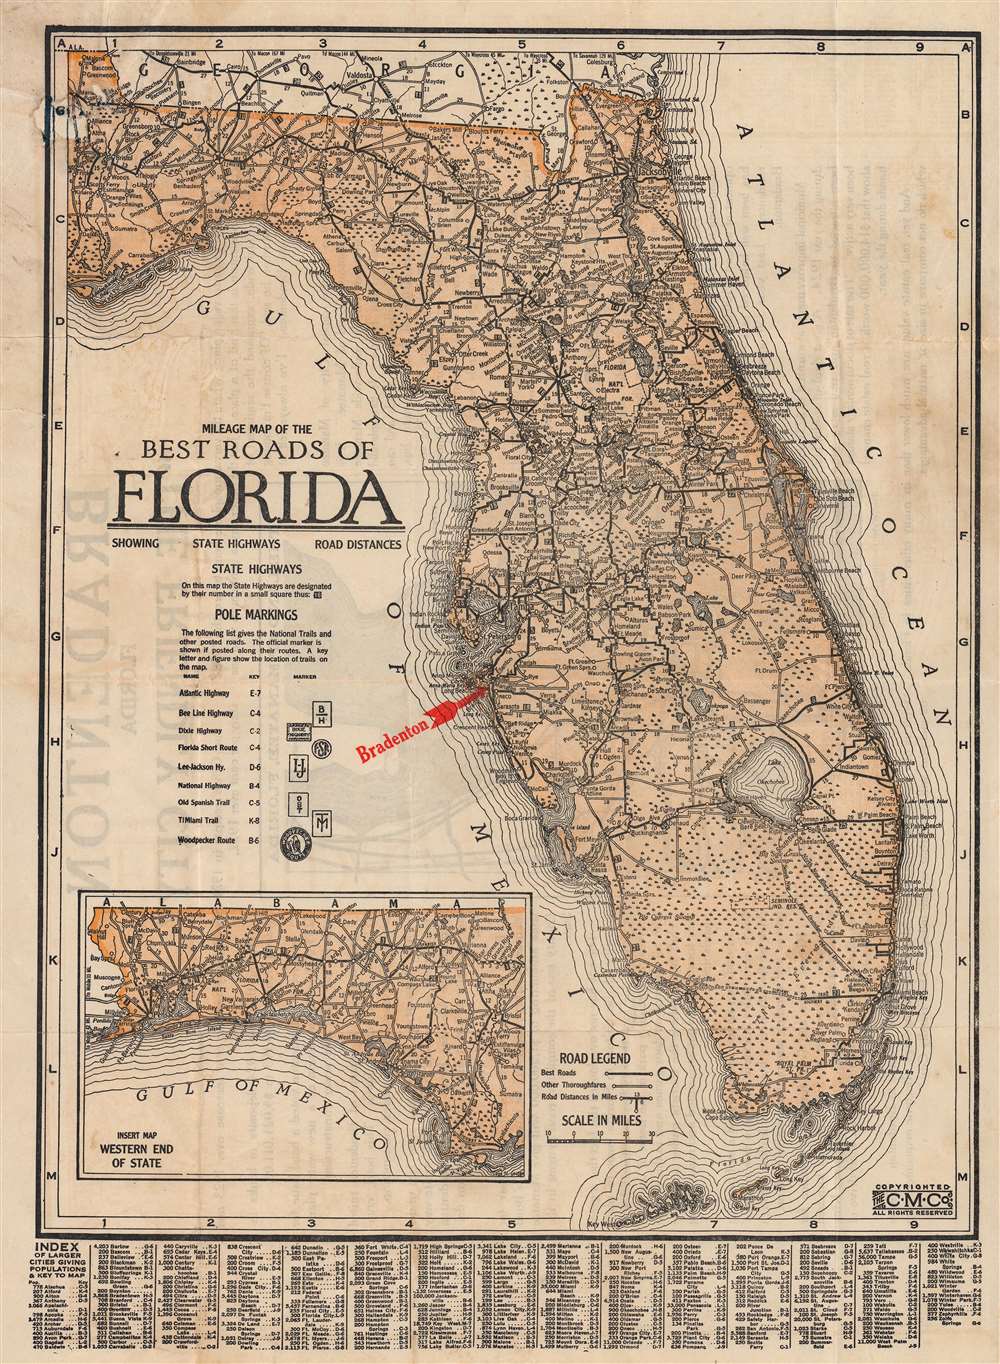 Milage Map of the Best Roads of Florida. - Main View